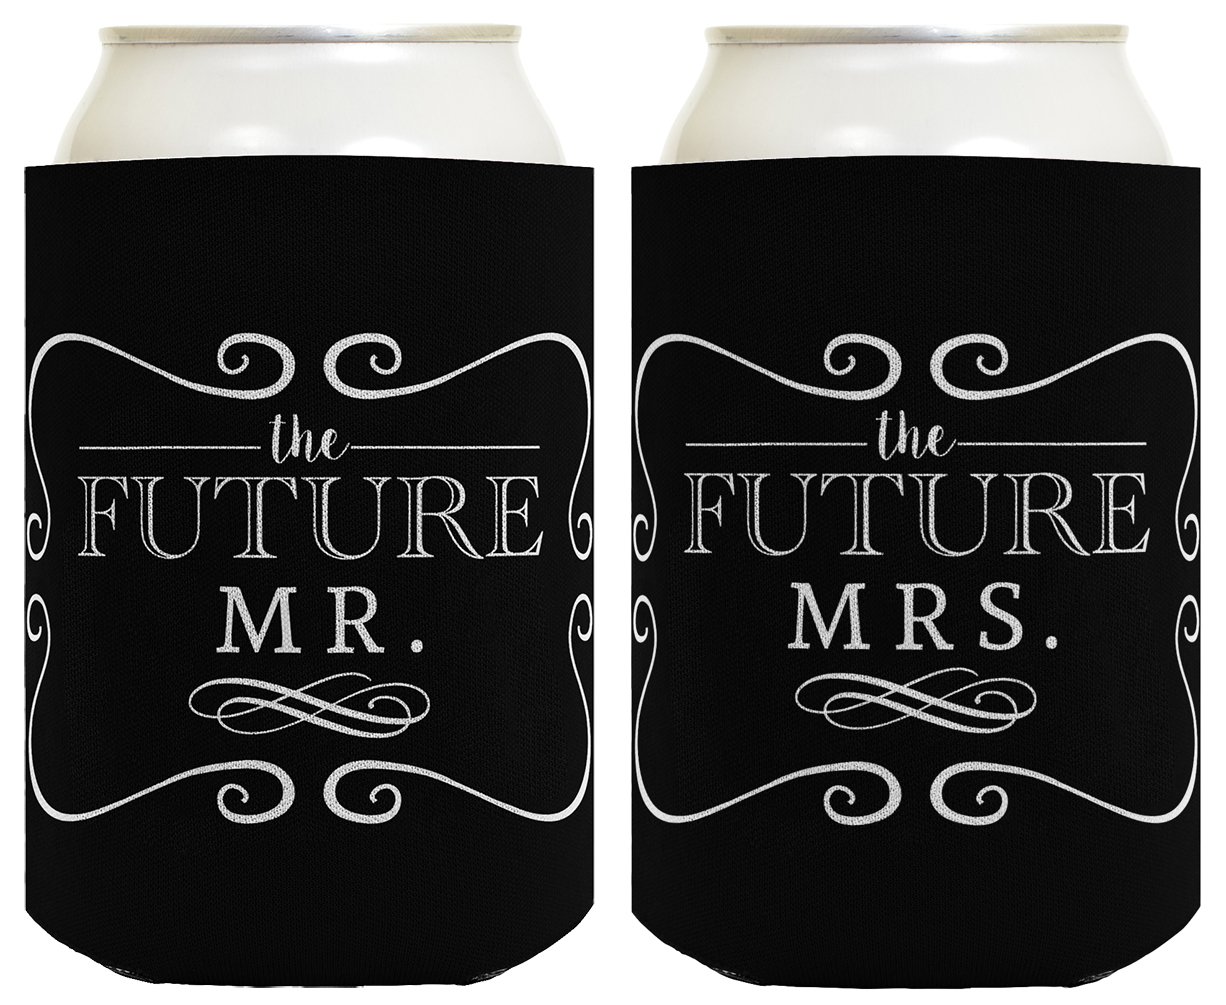 Bridal Shower Gifts Future Mr & Mrs Wedding Gift 2 Pack Can Coolie Drink Coolers Coolies Black